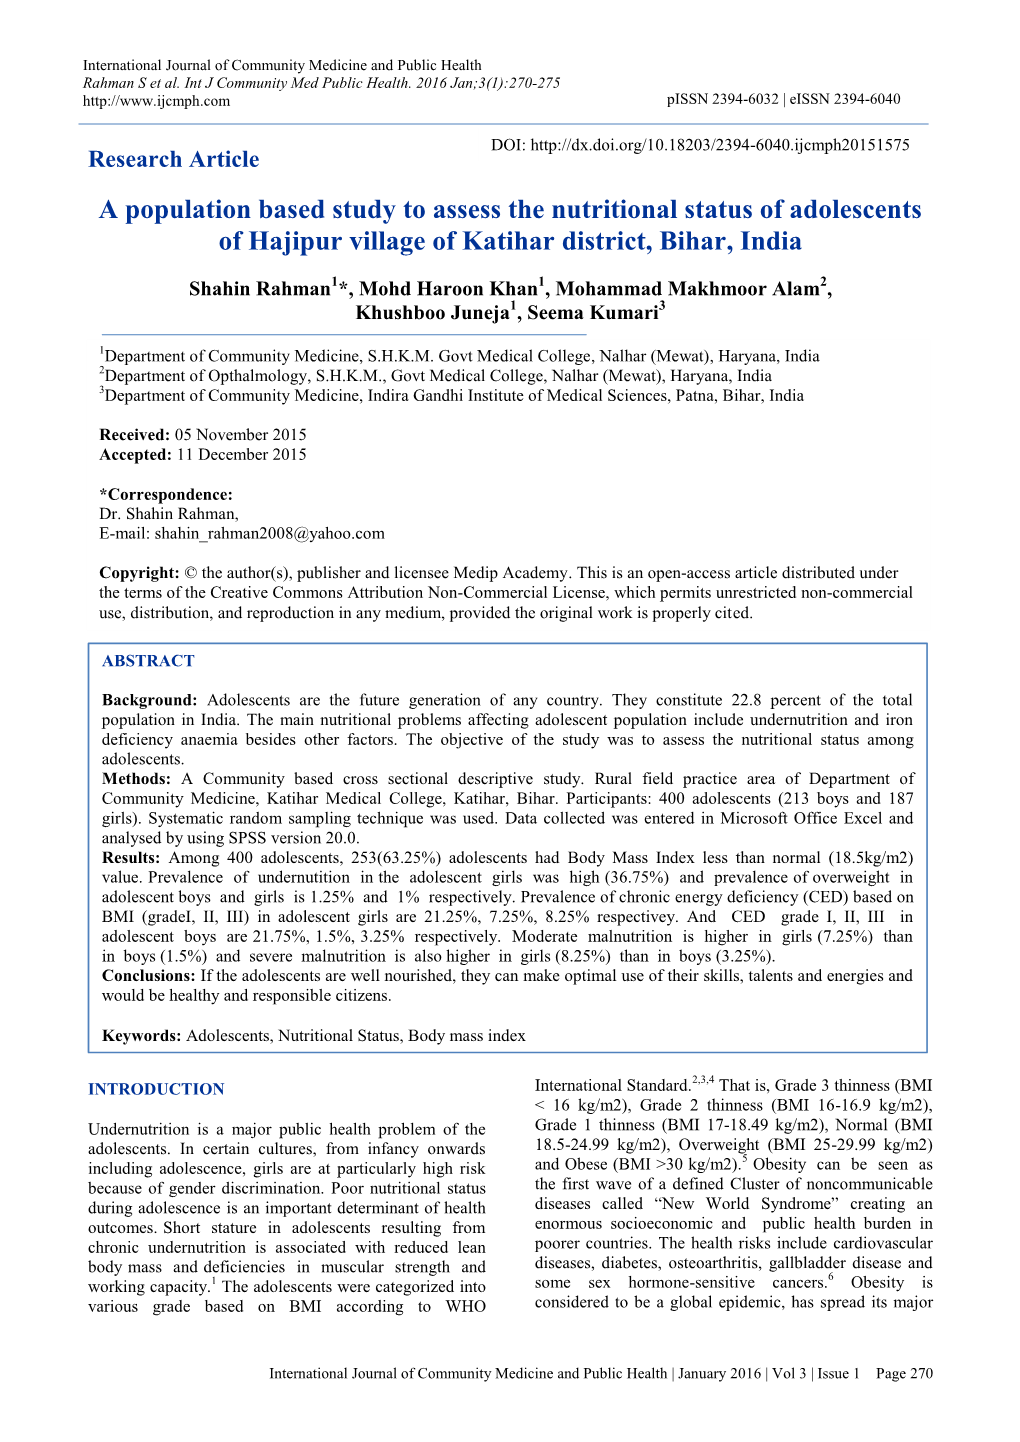 A Population Based Study to Assess the Nutritional Status of Adolescents of Hajipur Village of Katihar District, Bihar, India